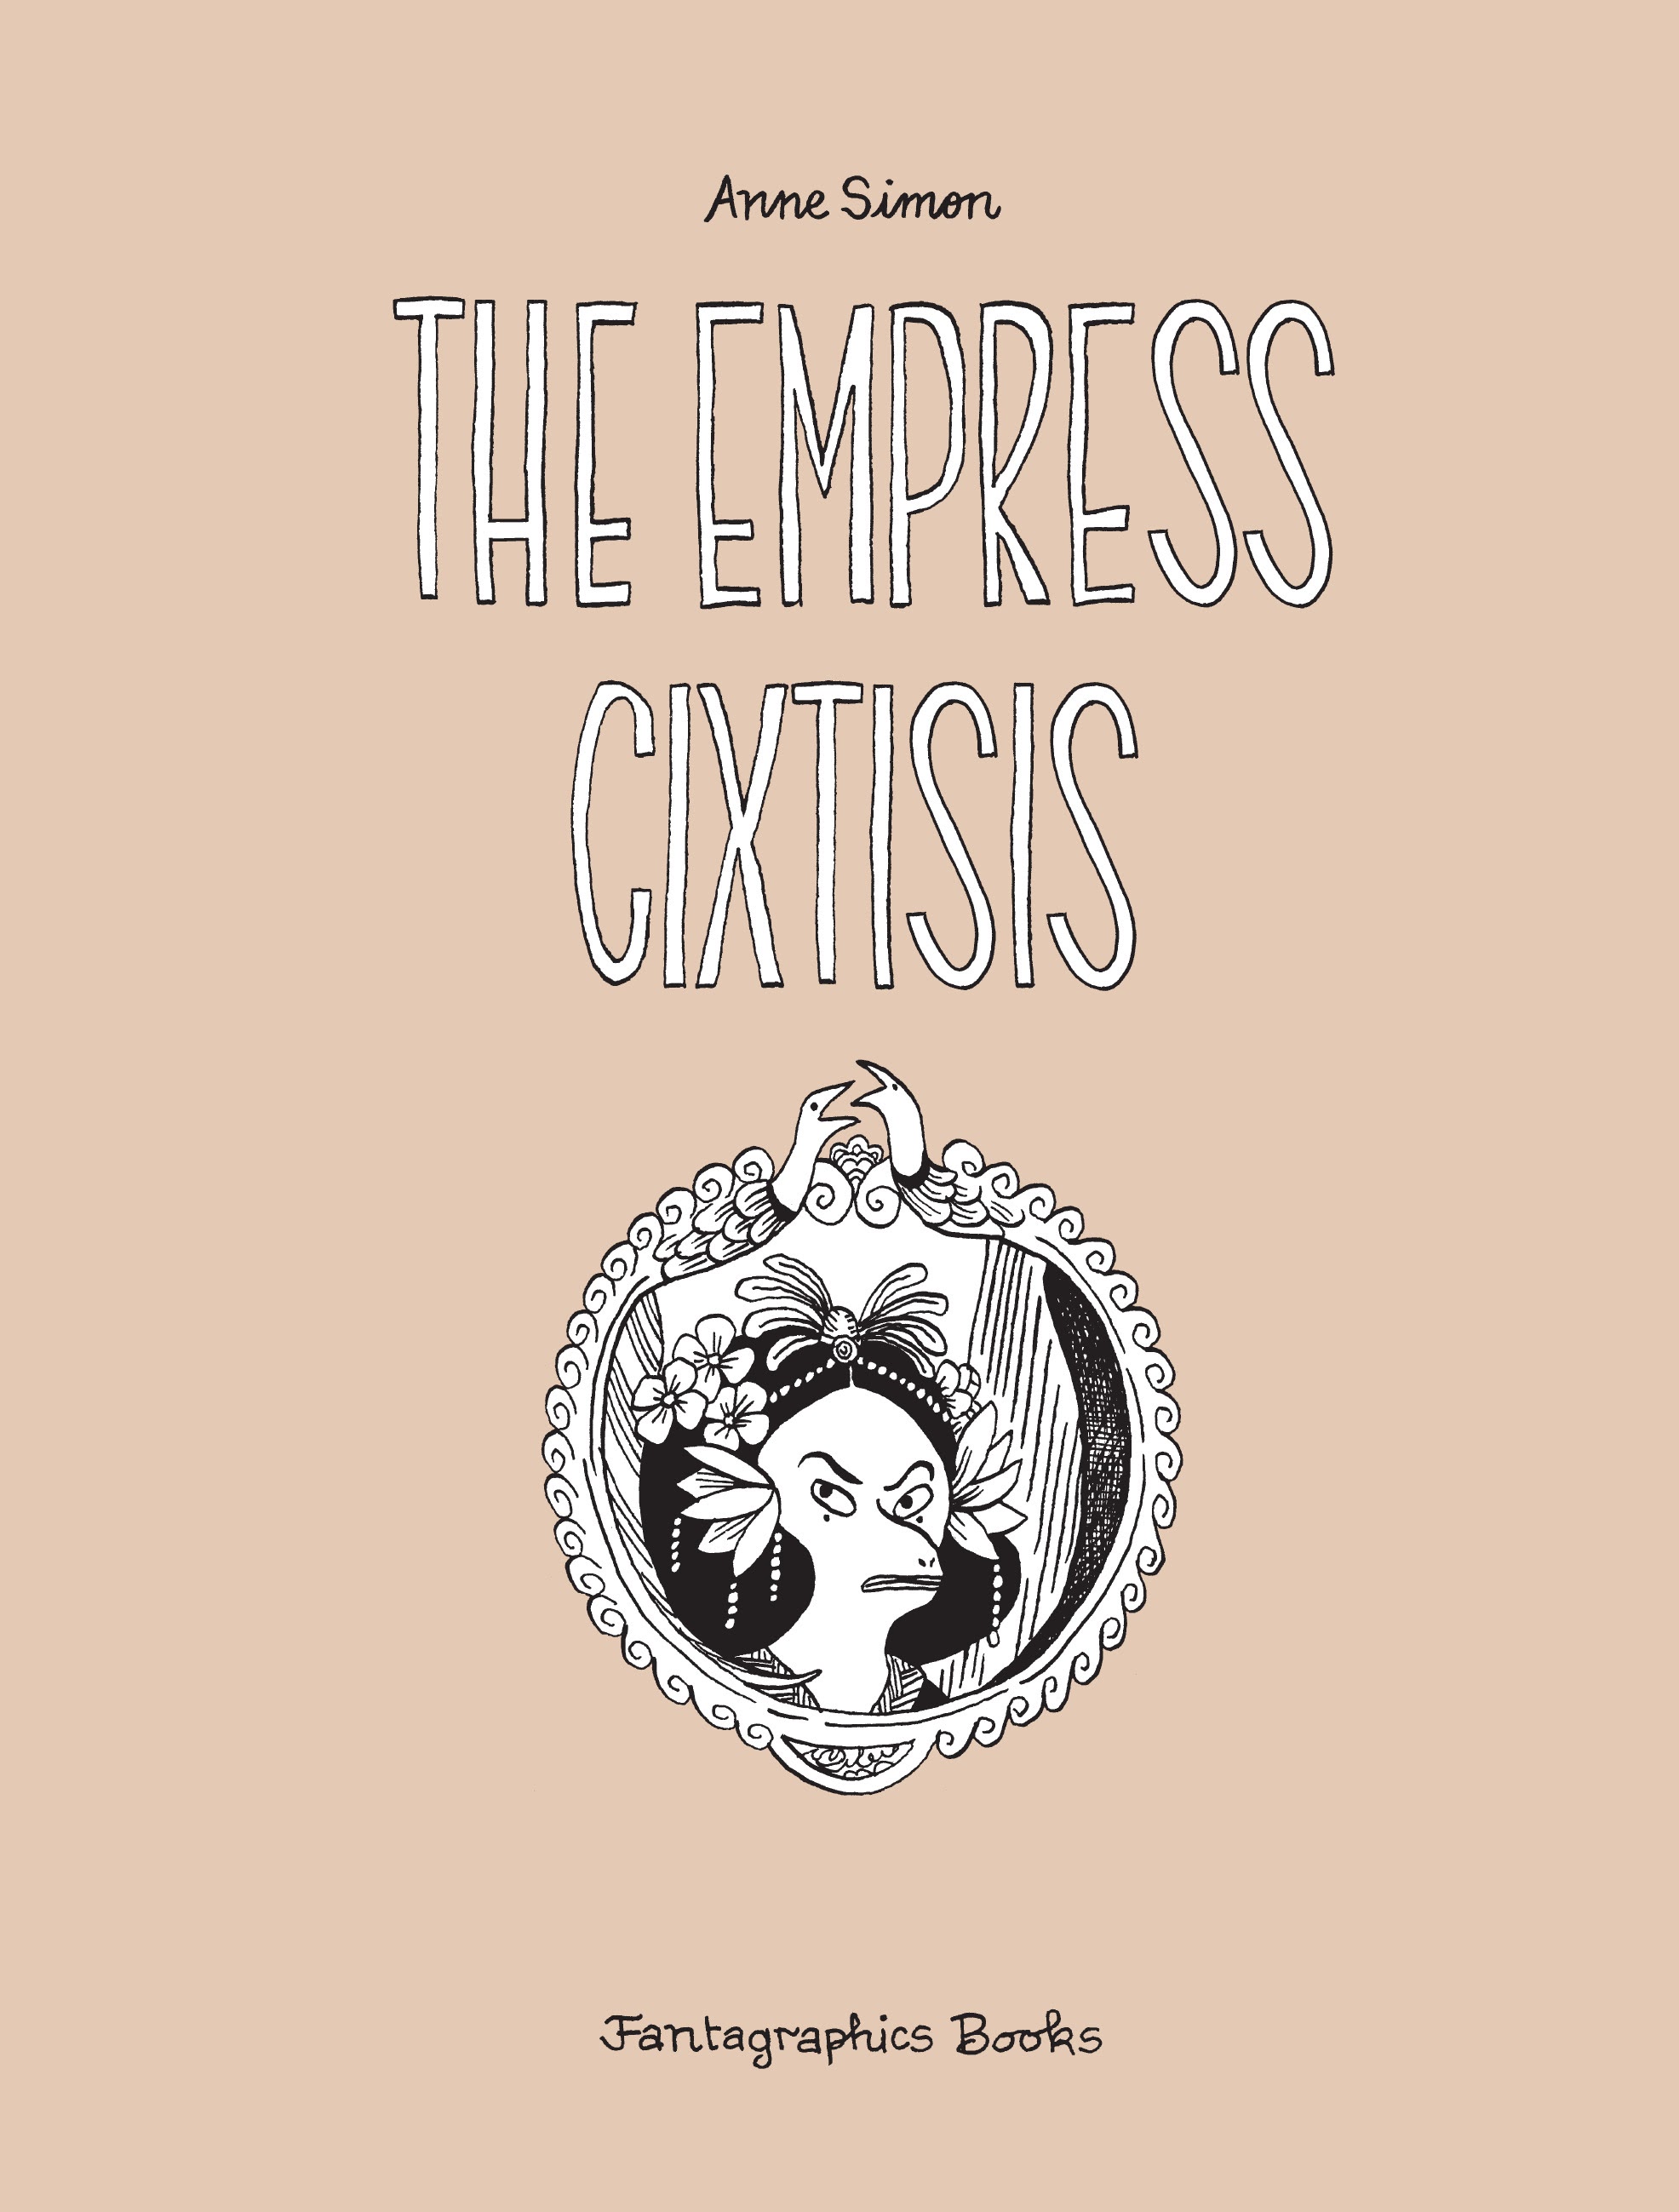 Read online The Empress Cixtisis comic -  Issue # TPB - 2